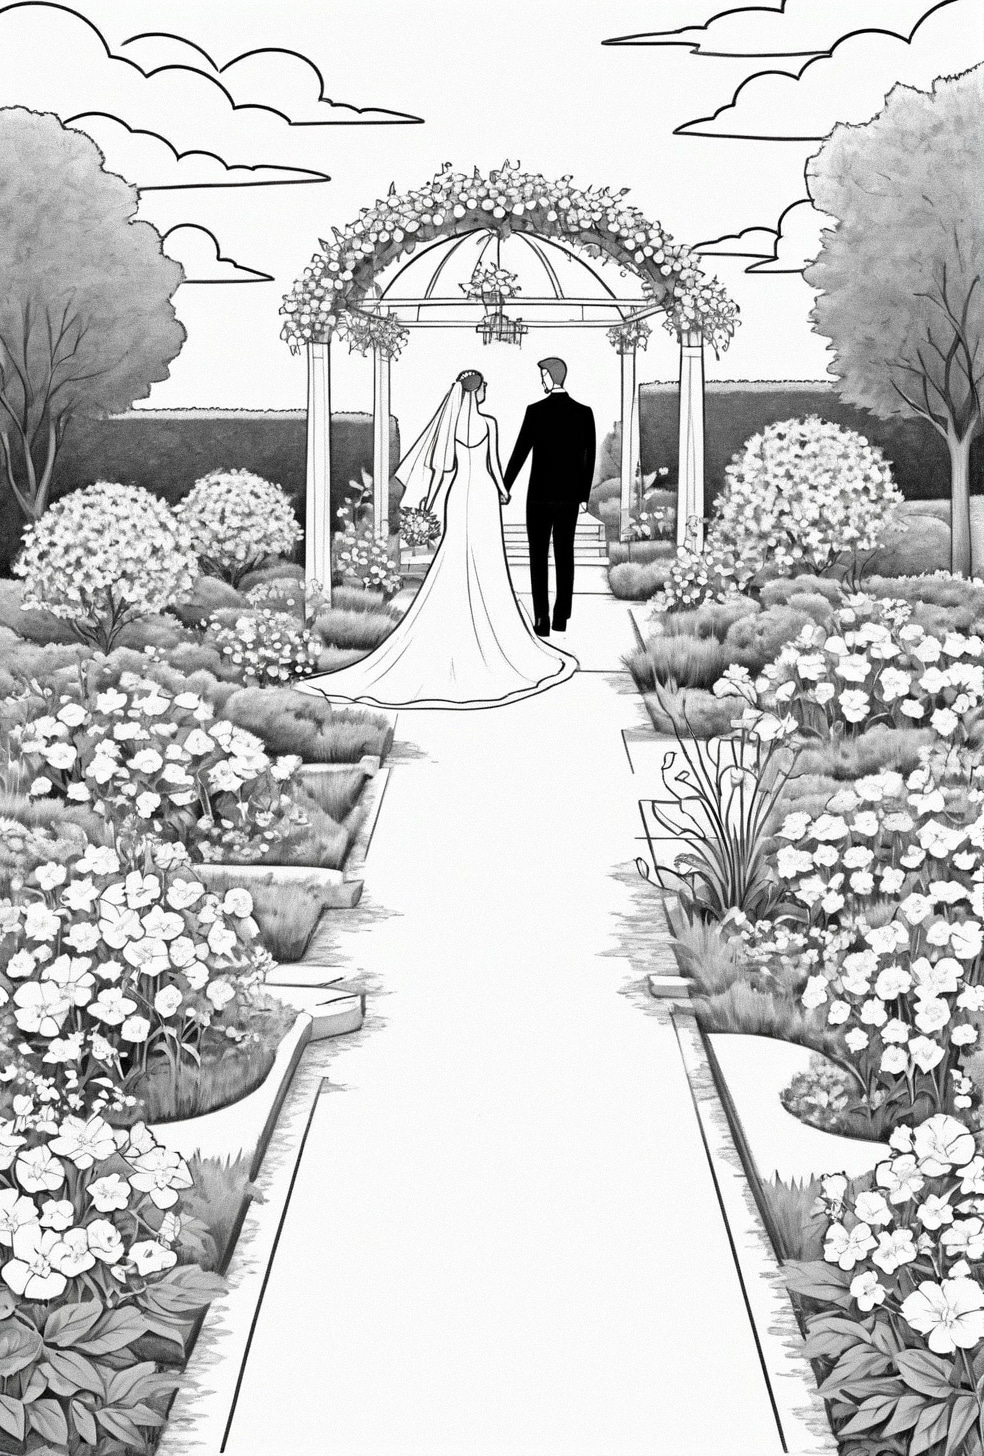 Wedding colouring page